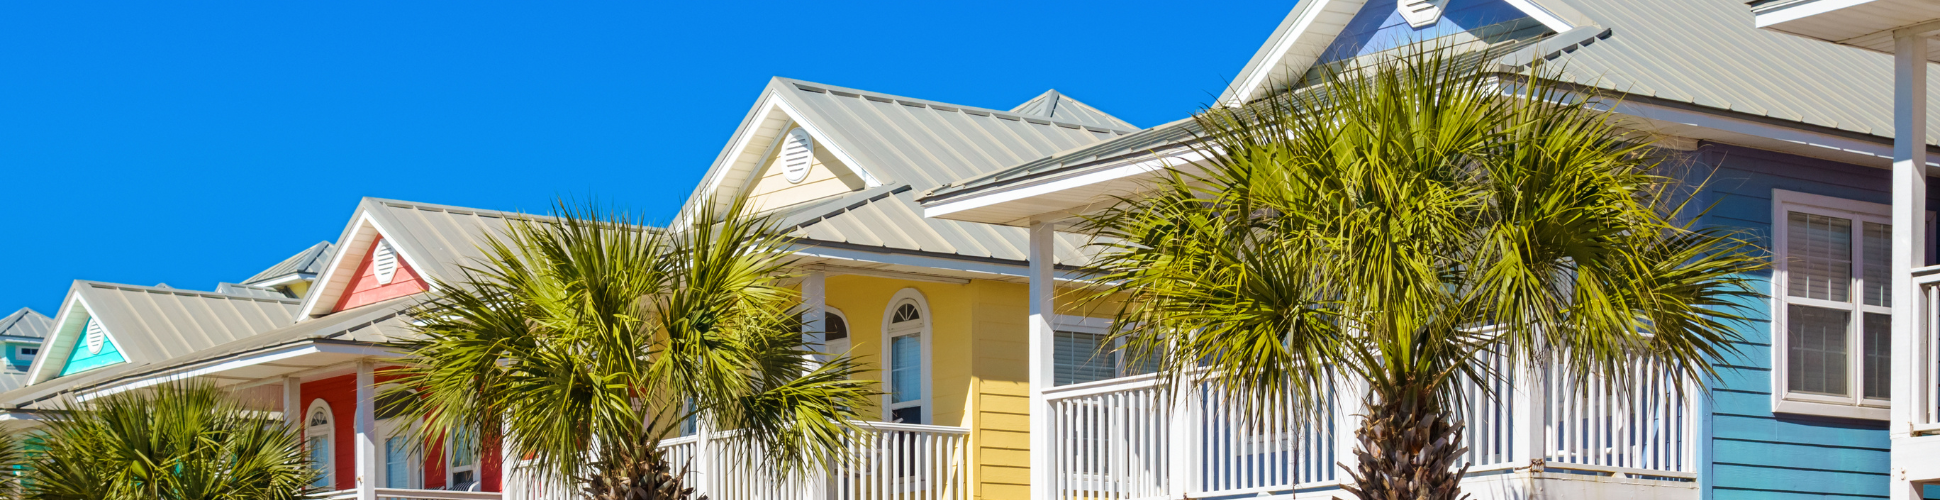 How to Determine the Best Paint Colors for the Exterior of Your Florida Home